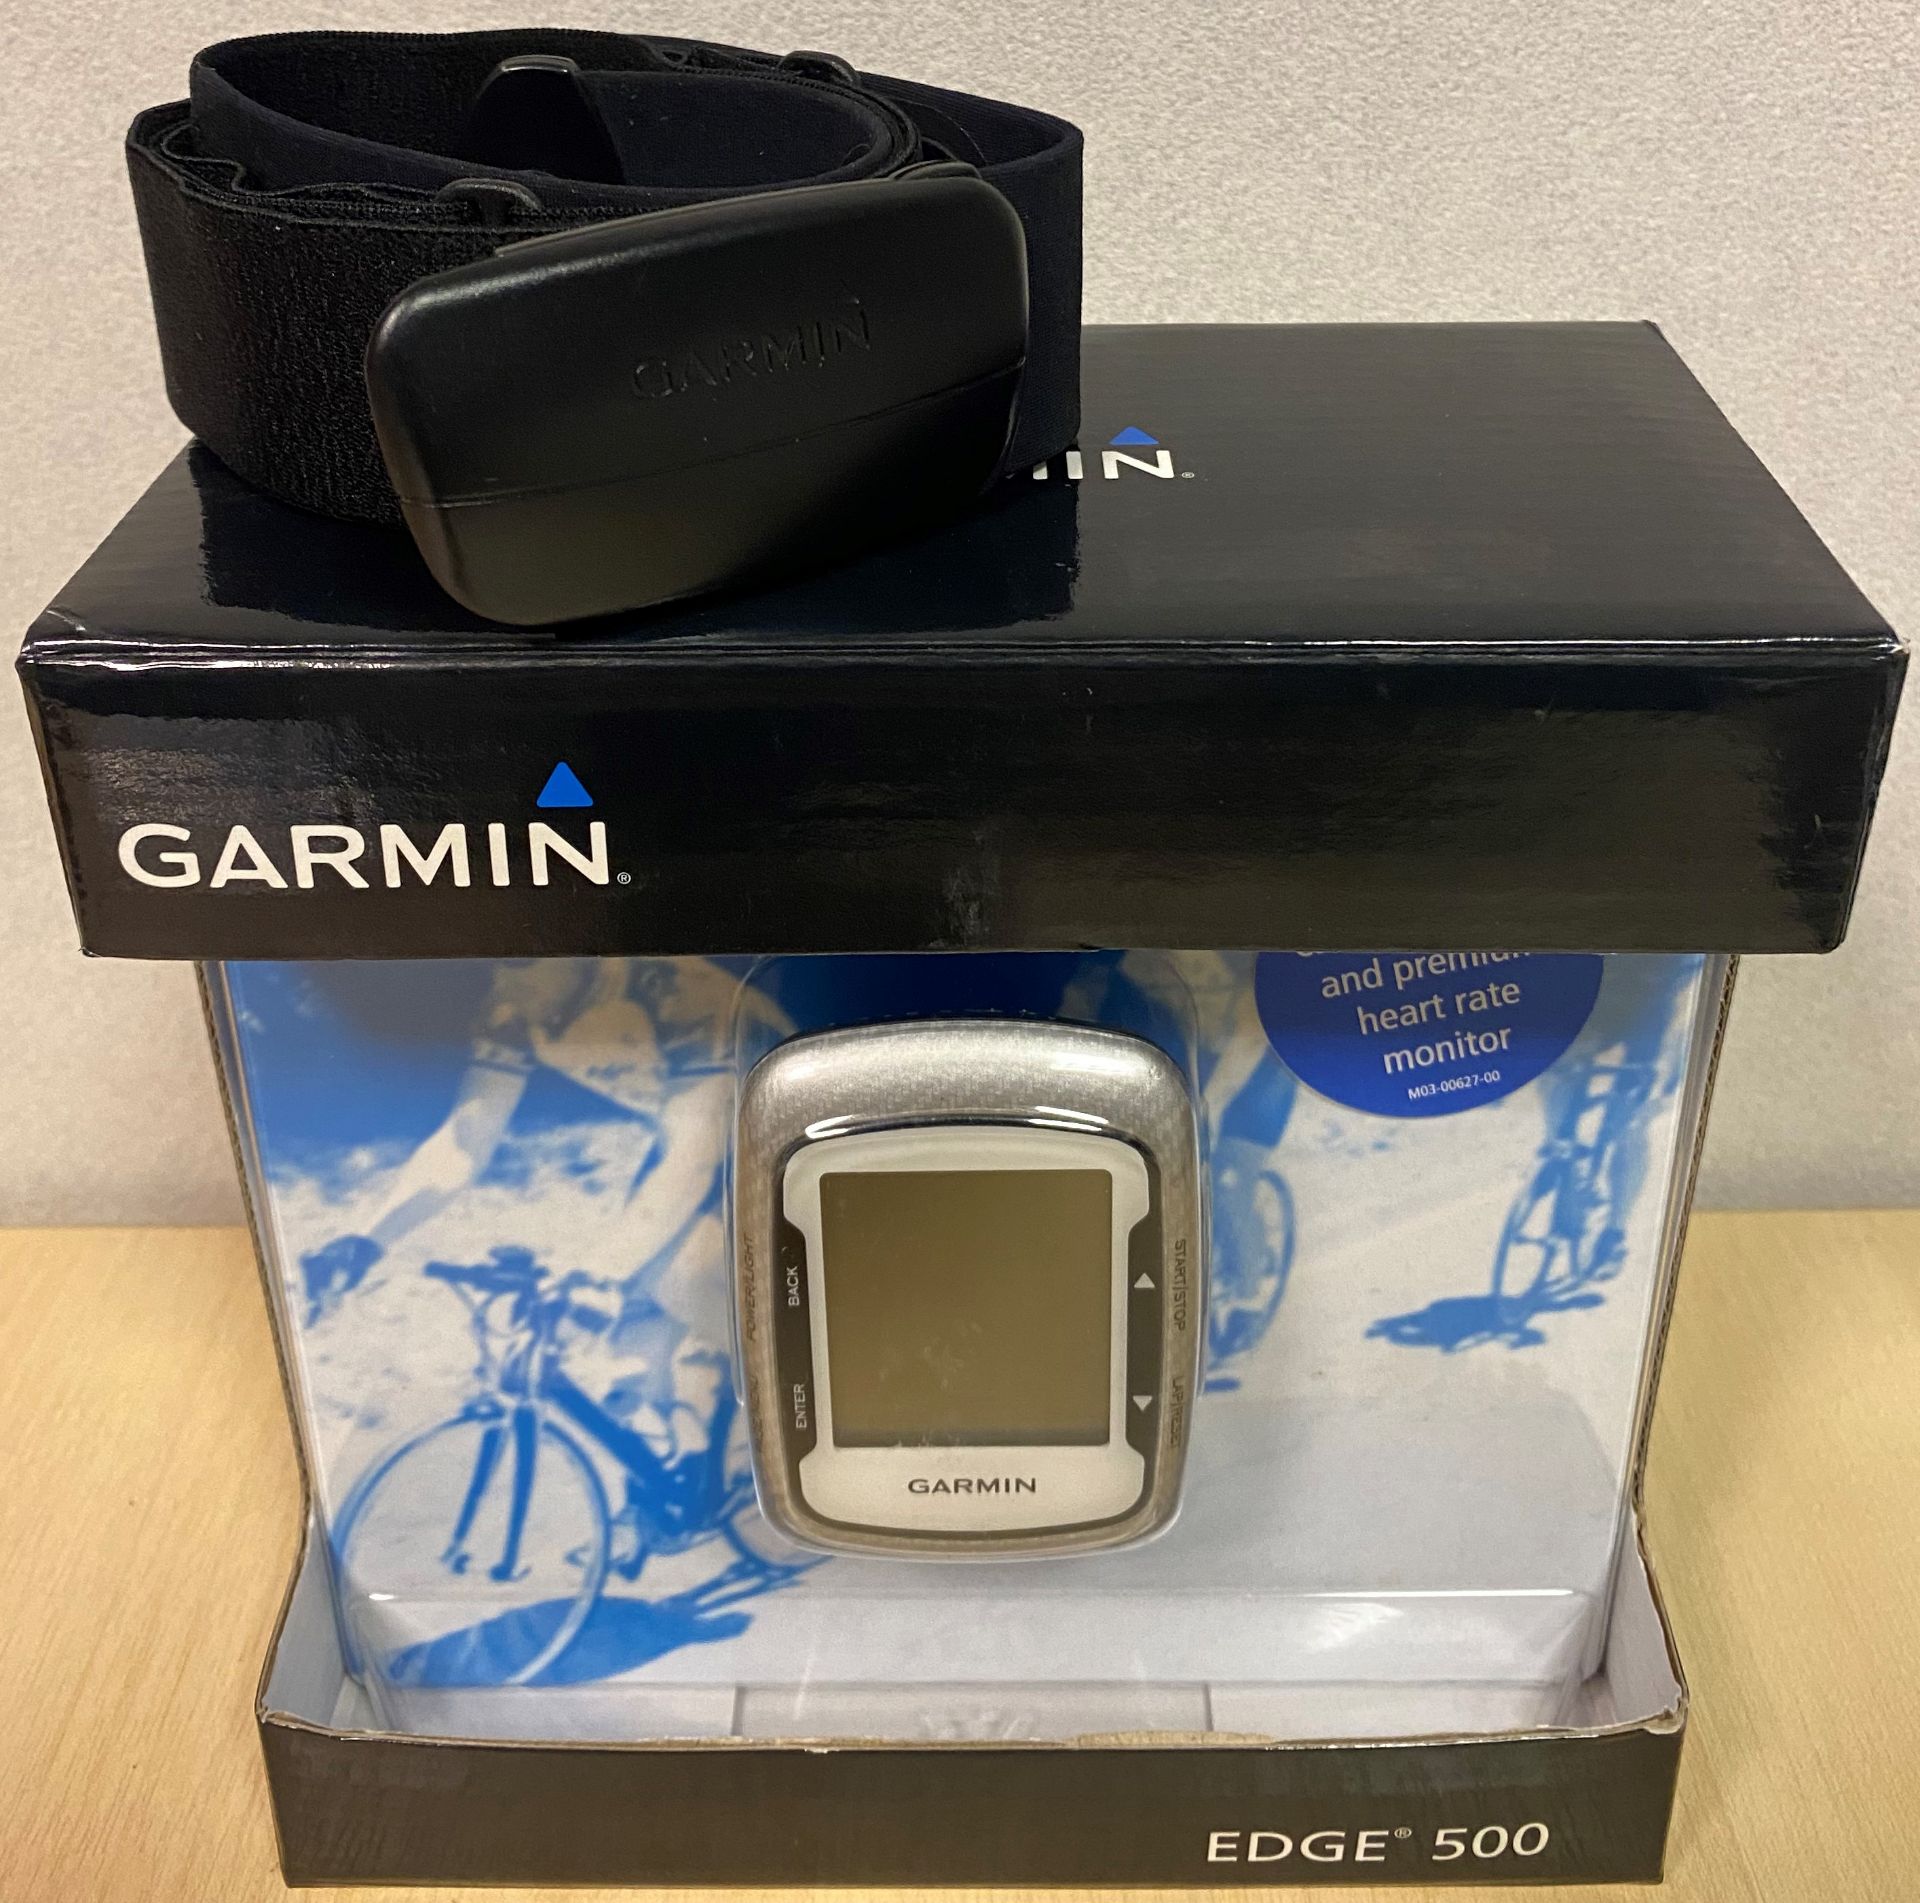 A Garmin Edge 500 cycling computer c/w heart rate monitor, - Image 2 of 2